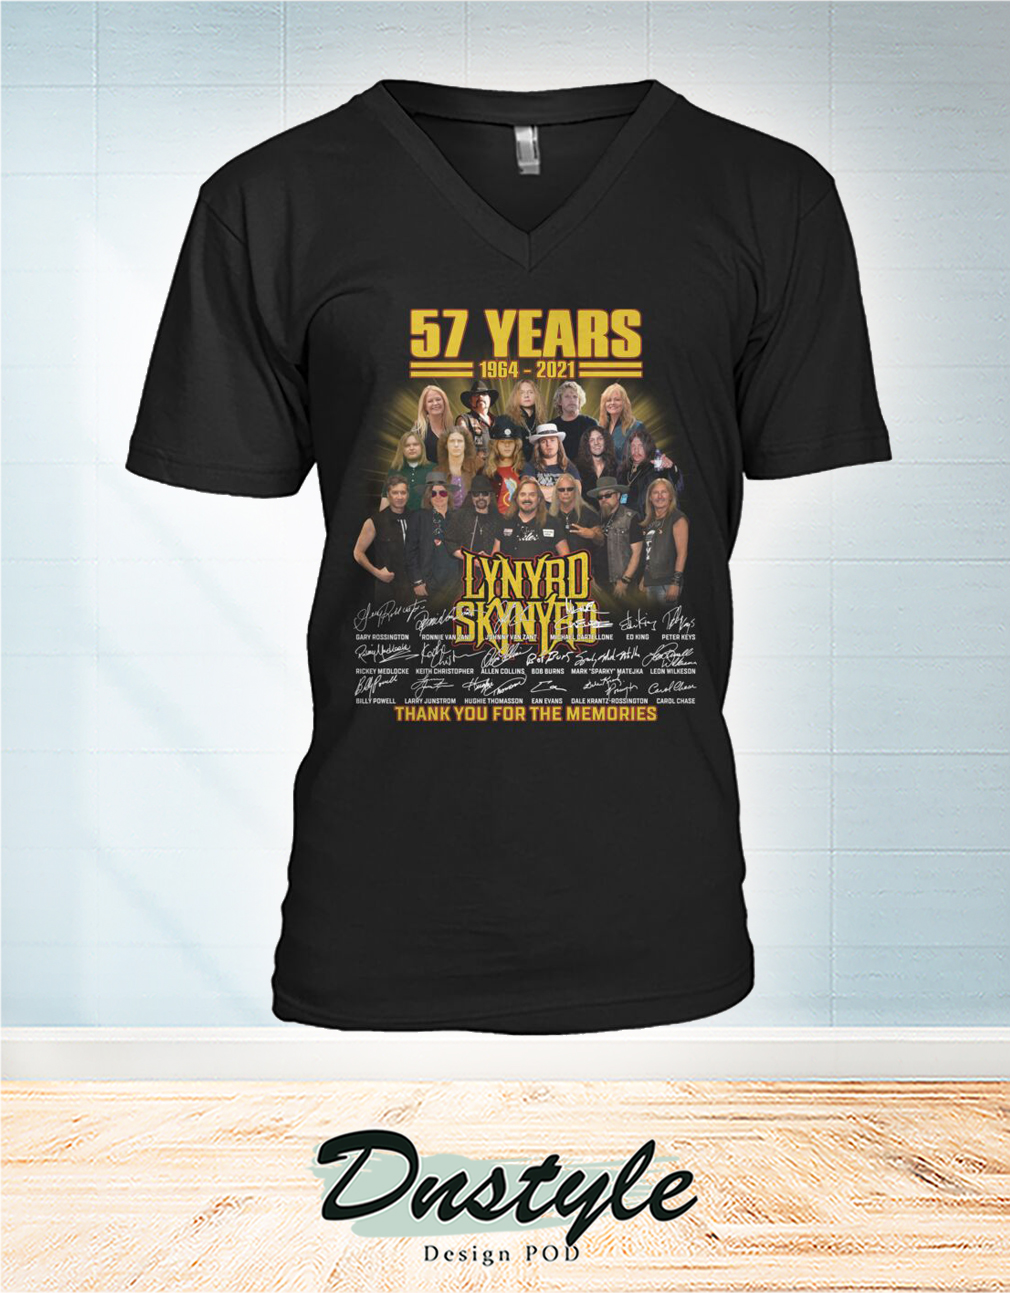 Lynyrd Skynyrd 57 years signature thank you for the memories v-neck